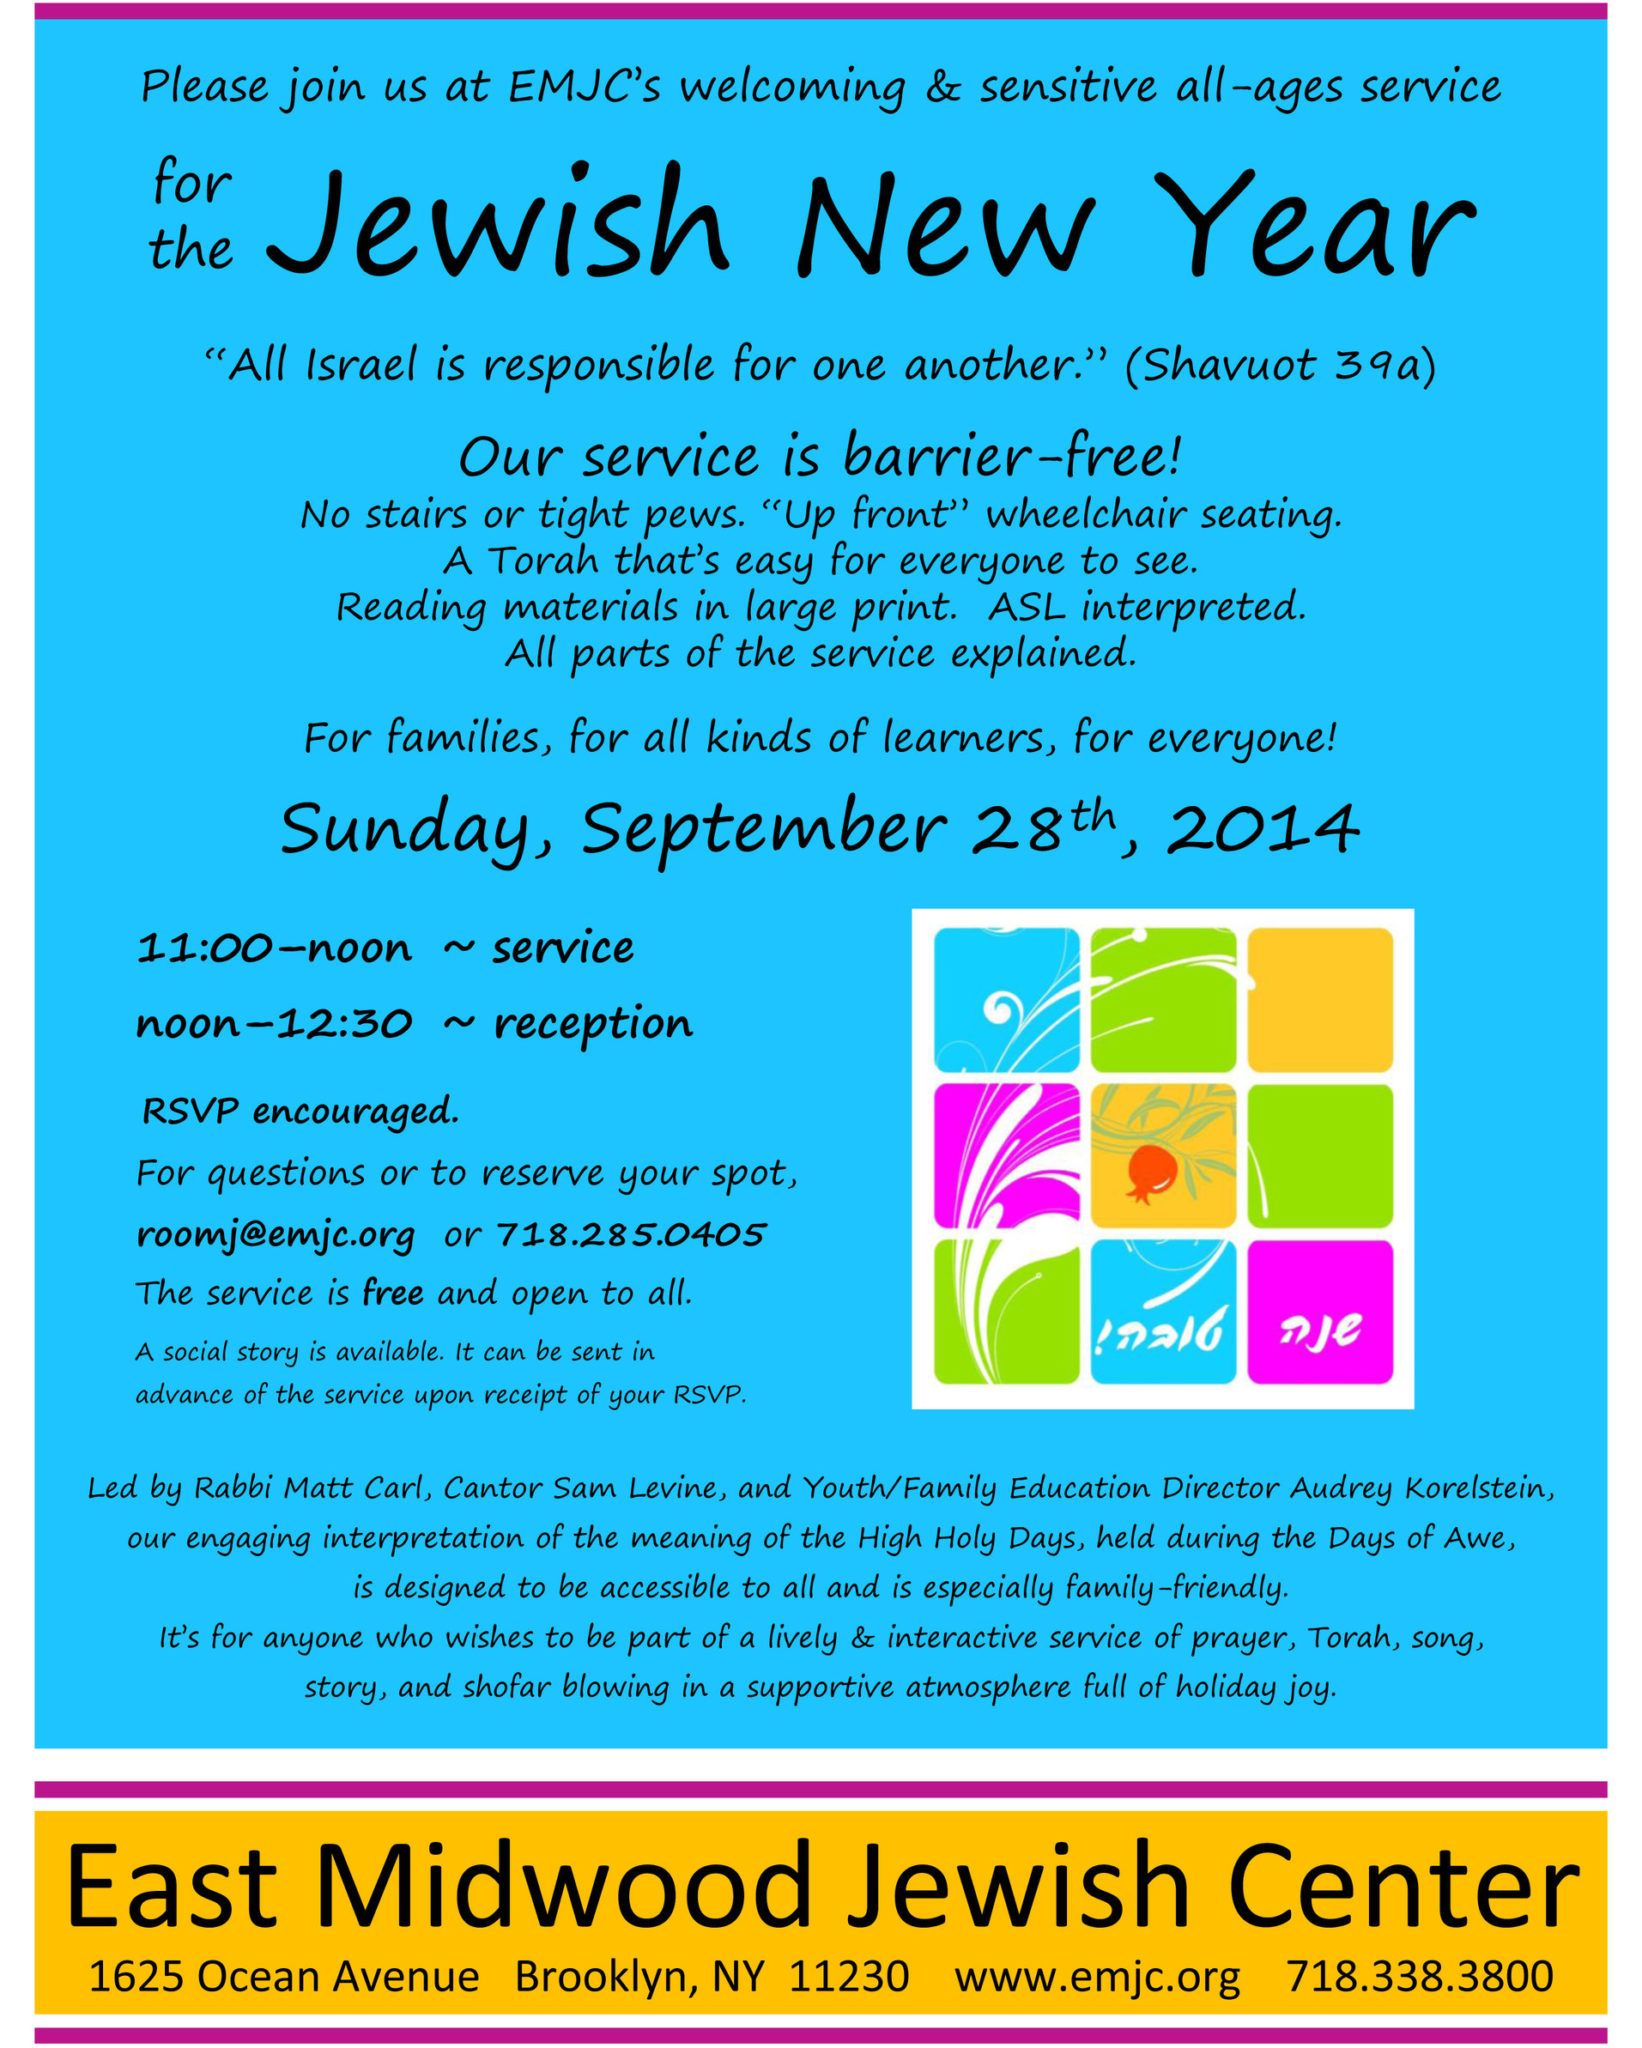 East Midwood Jewish Center To Hold ‘Barrier-Free’ High Holiday Service This Sunday